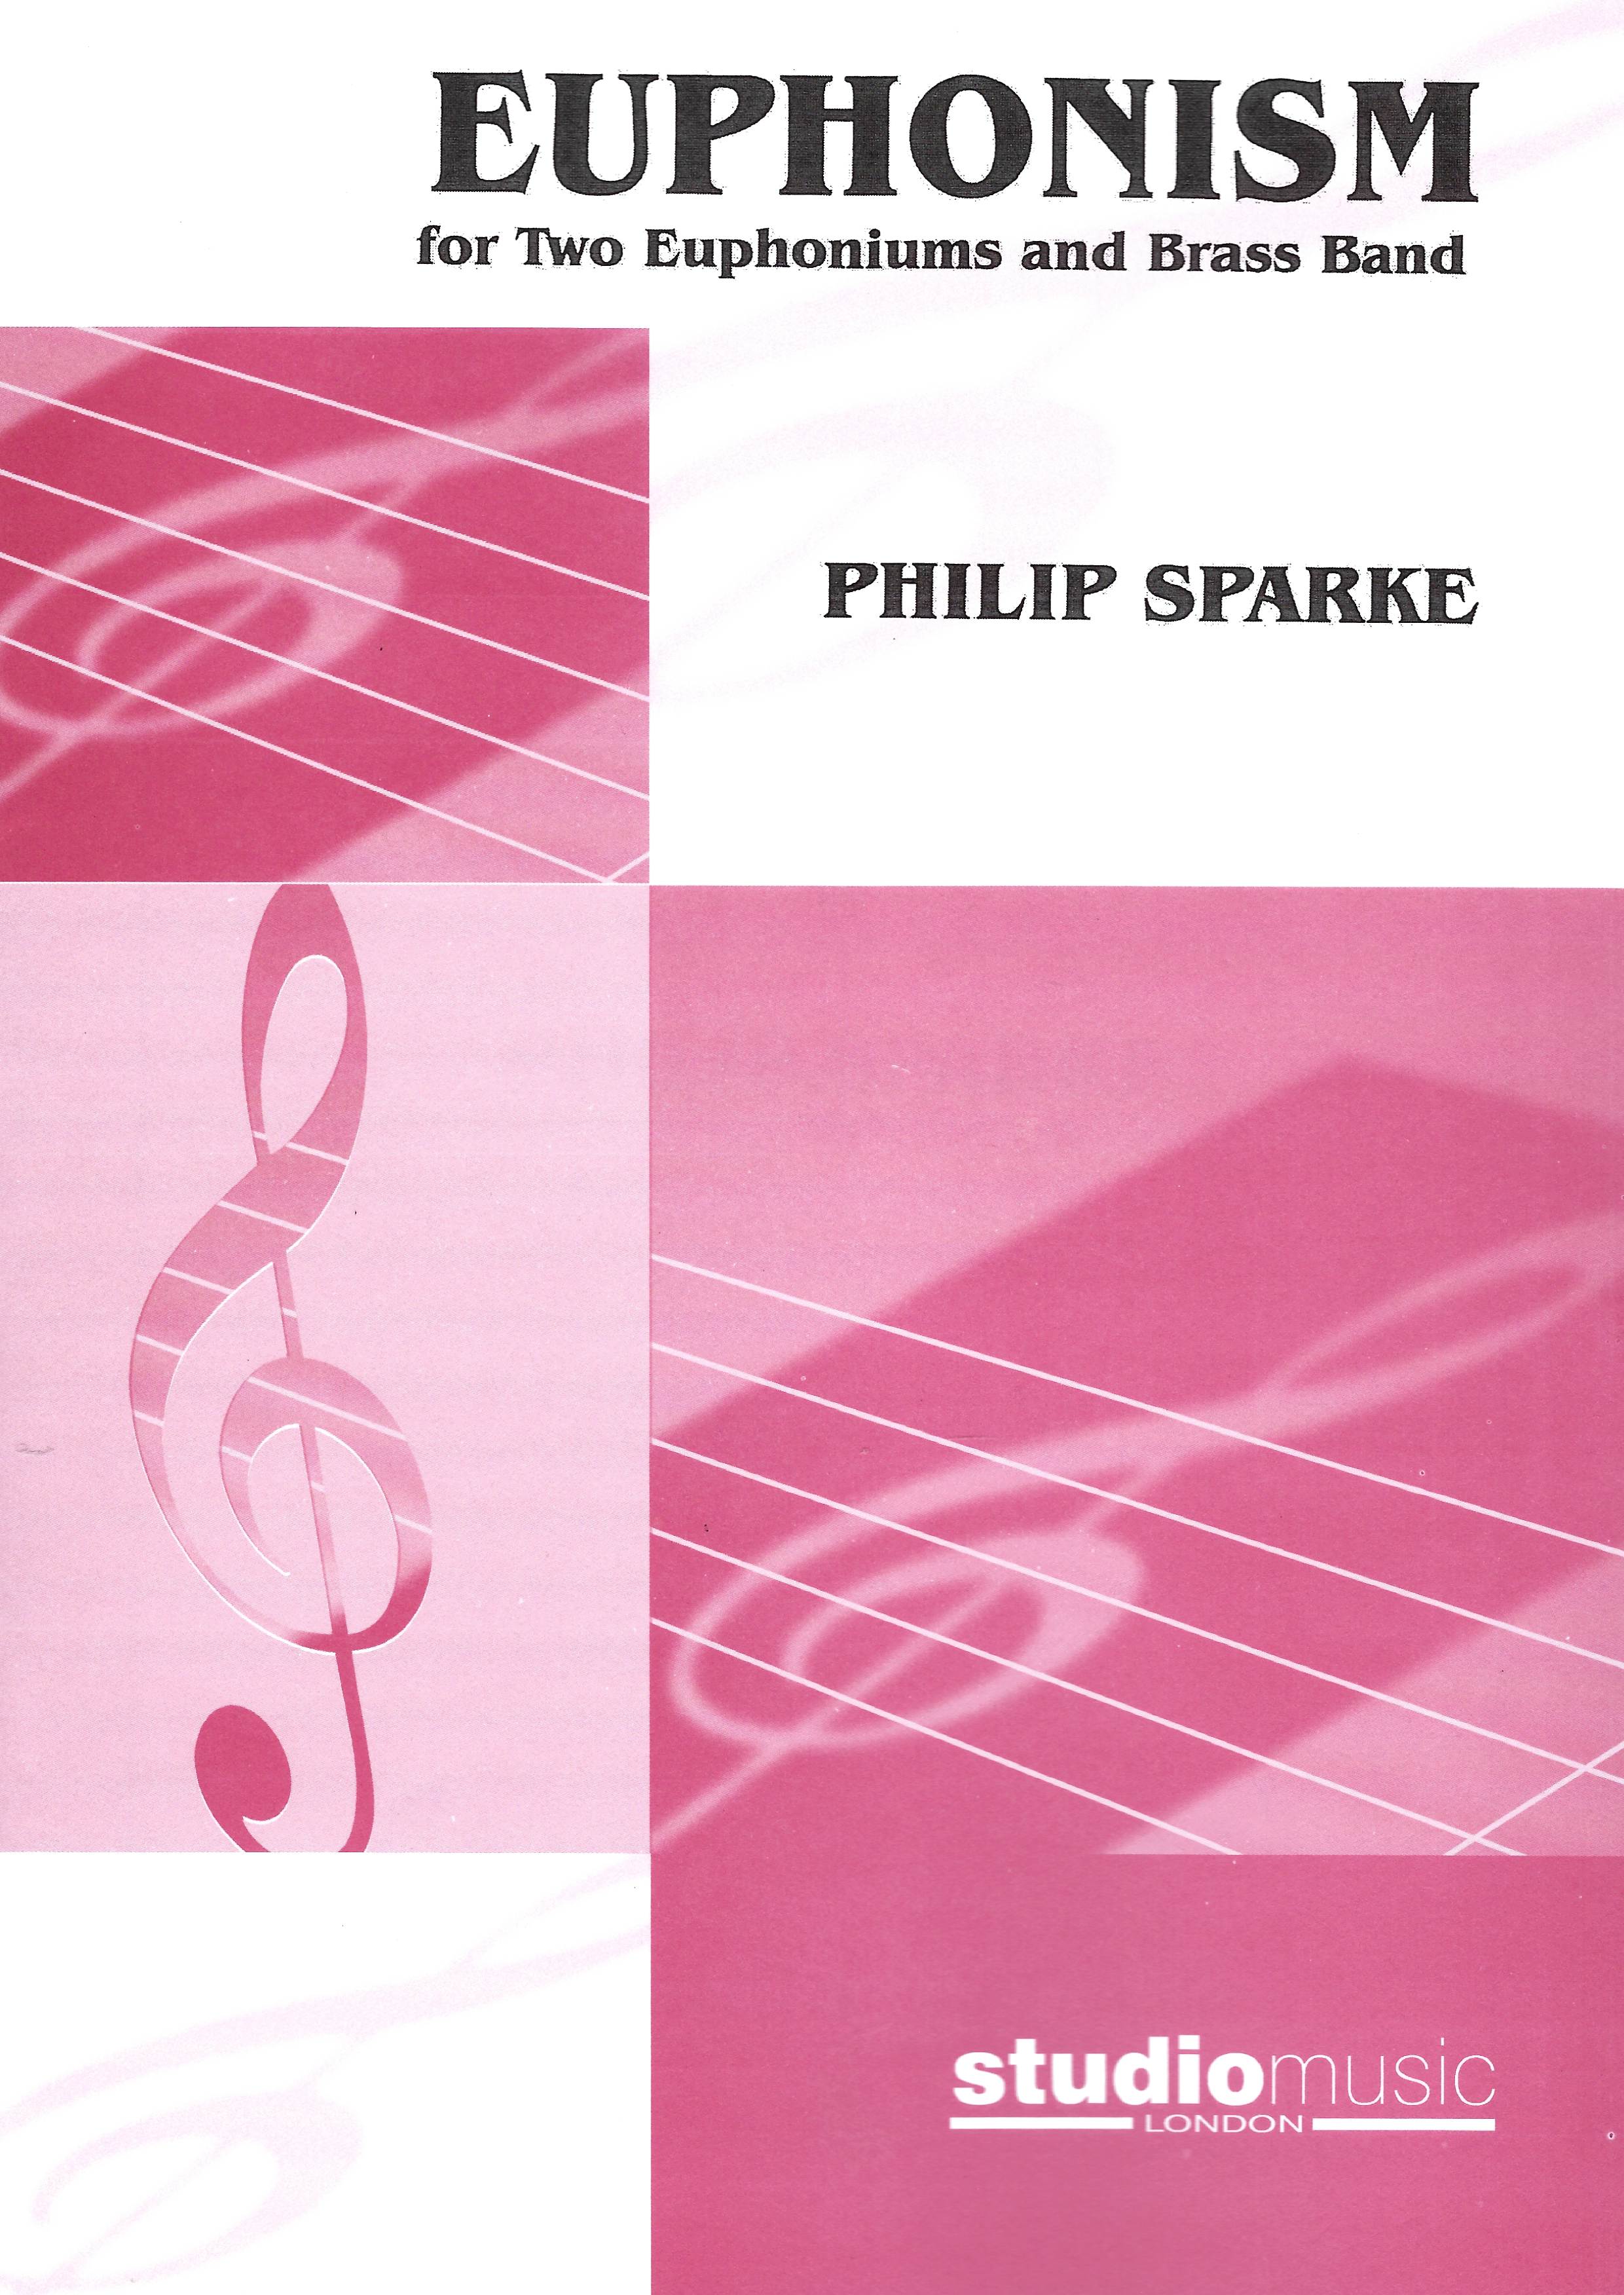 Euphonism - Philip Sparke - 2 Euphoniums and brass band